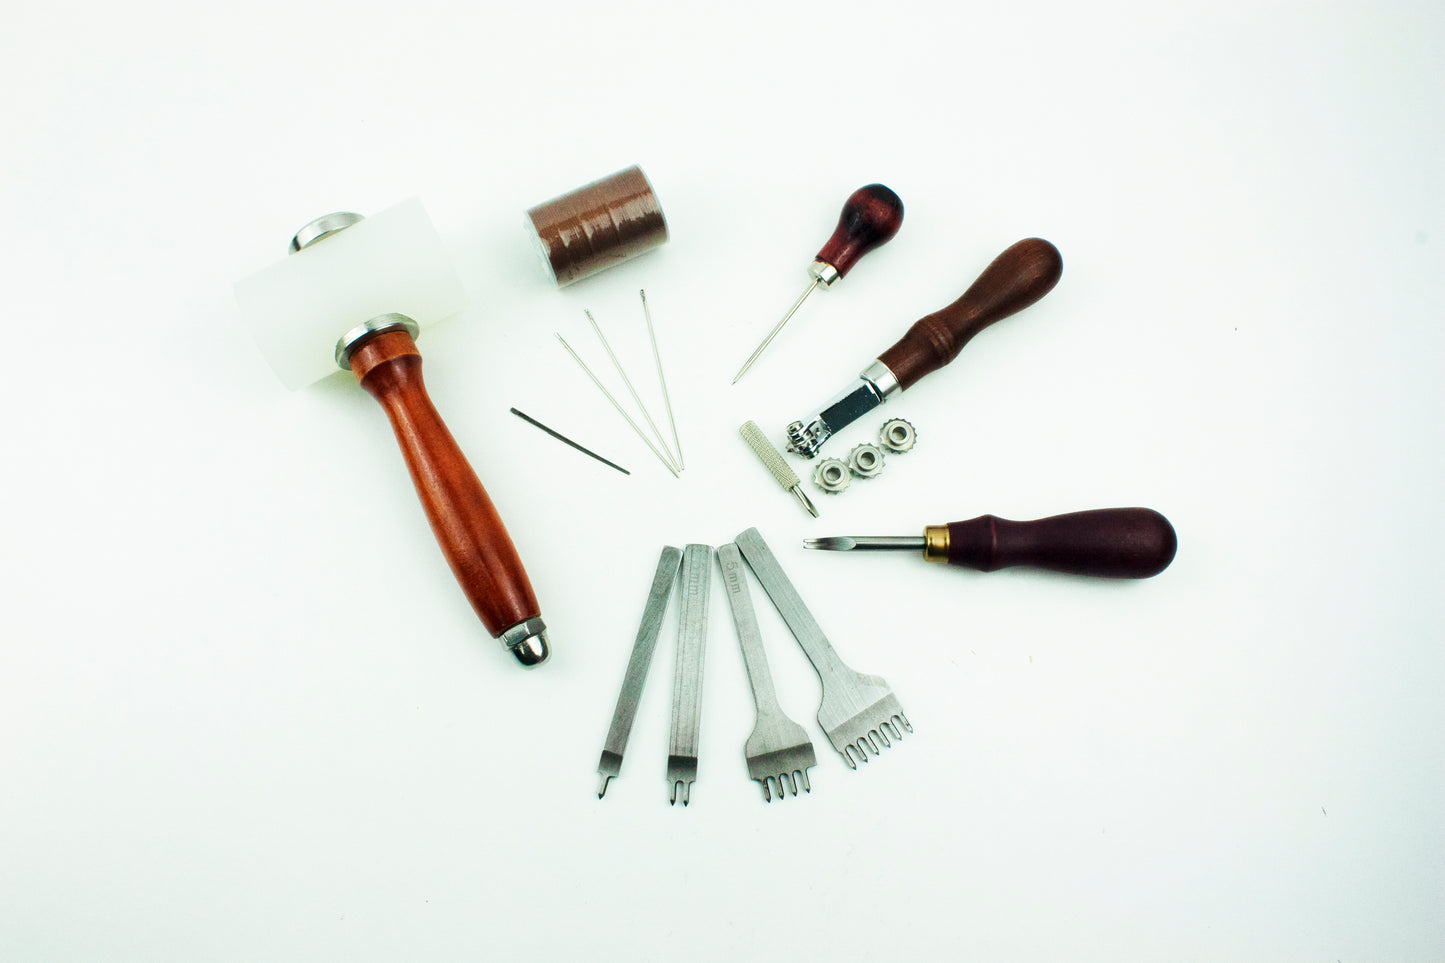 Initiation kit to leather crafts - Basic